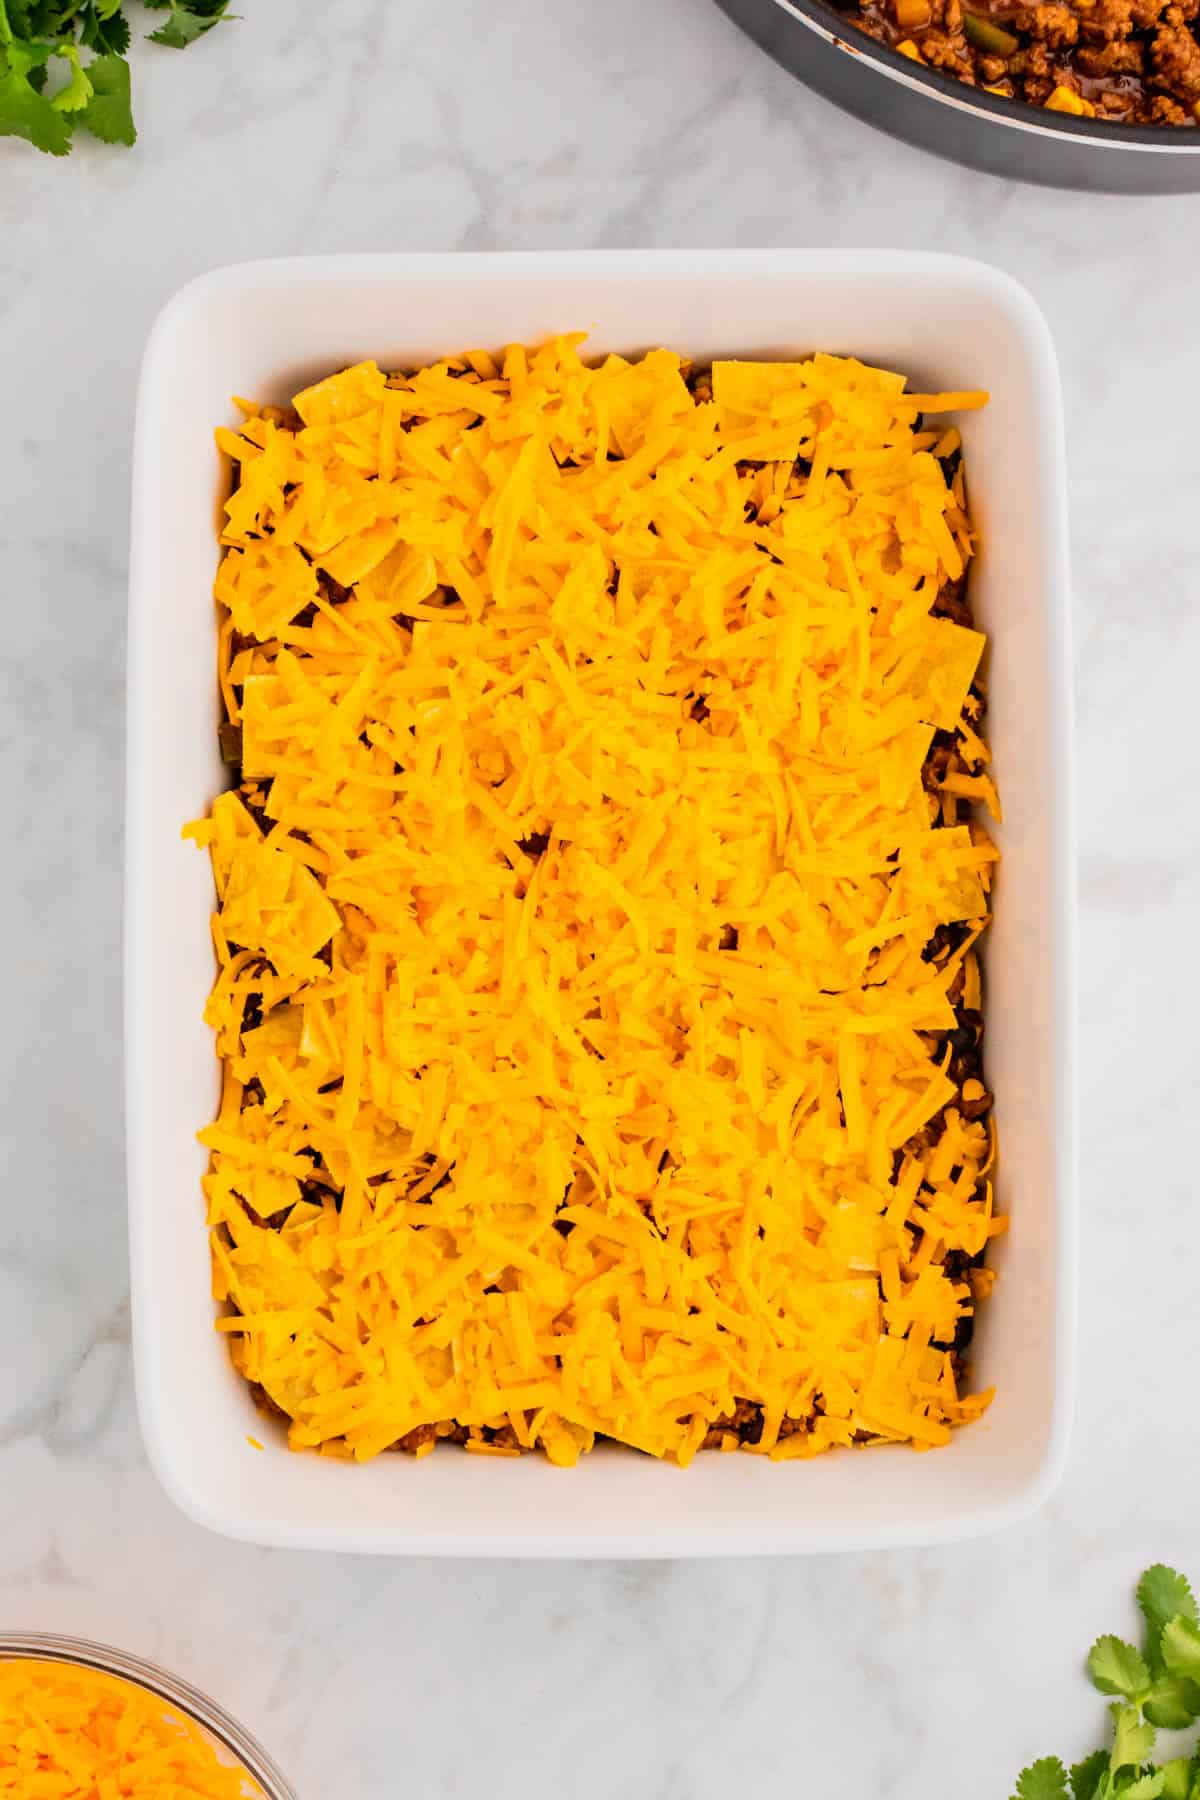 shredded cheddar cheese on top of tortillas and ground beef in a baking dish